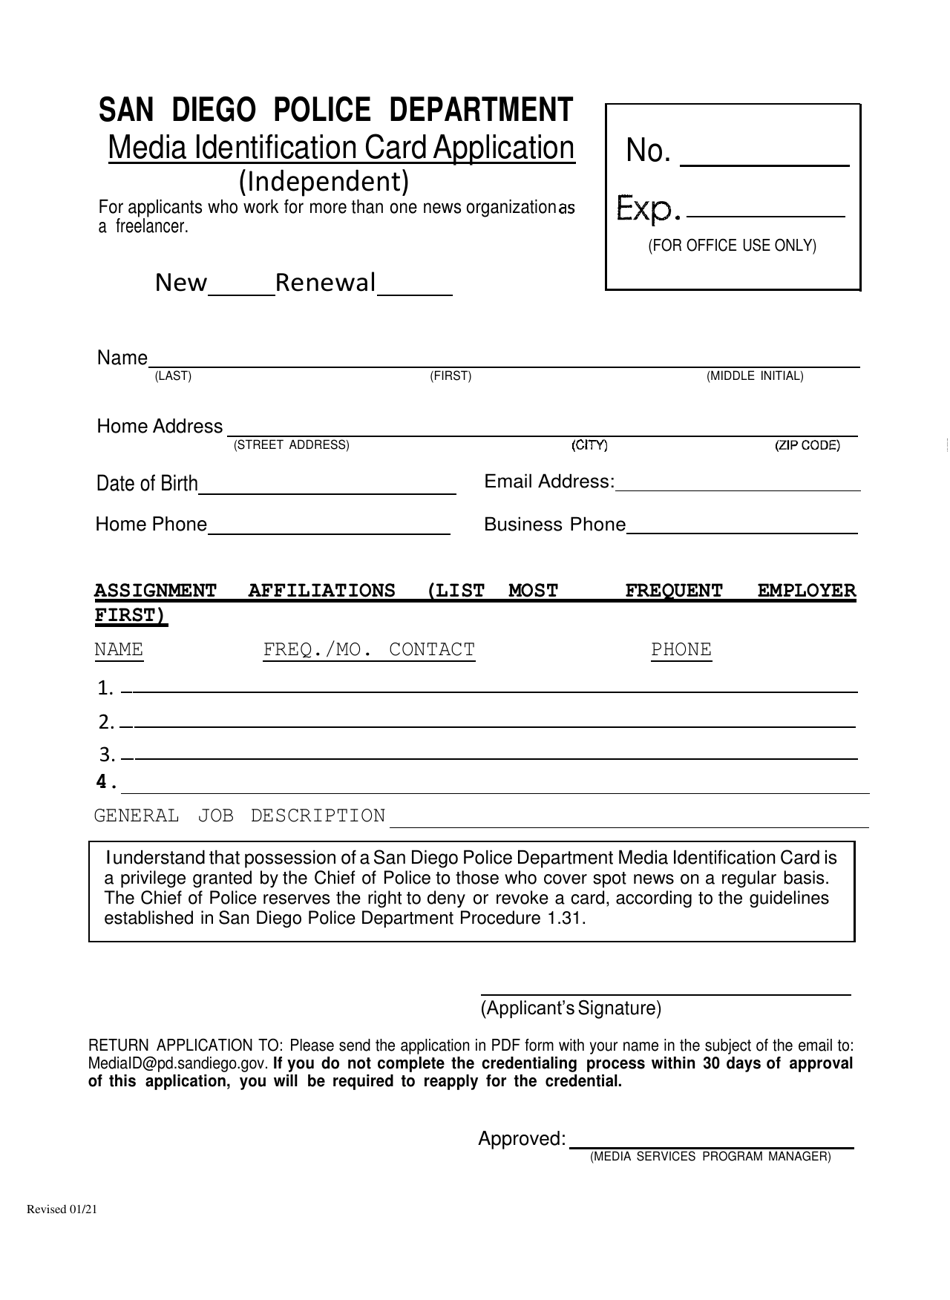 Media Identification Card Application (Independent) for Applicants Who Work for More Than One News Organization as a Freelancer - City of San Diego, California, Page 1